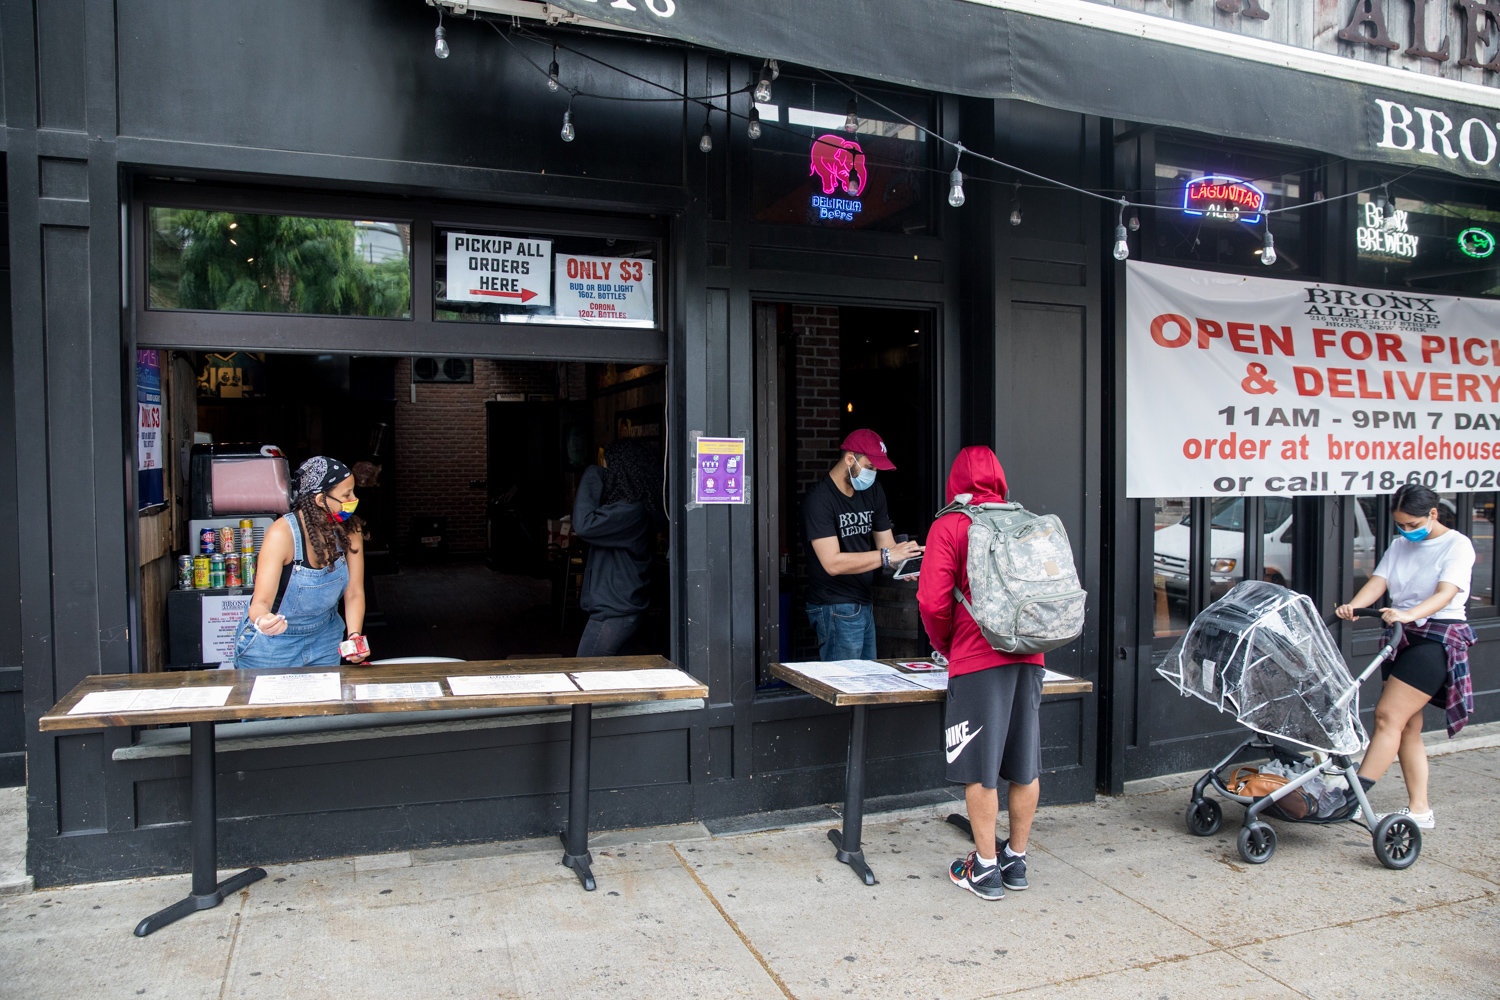 The Bronx Alehouse has adapted its business to curbside pickup and delivery in order to stay open during the coronavirus pandemic.